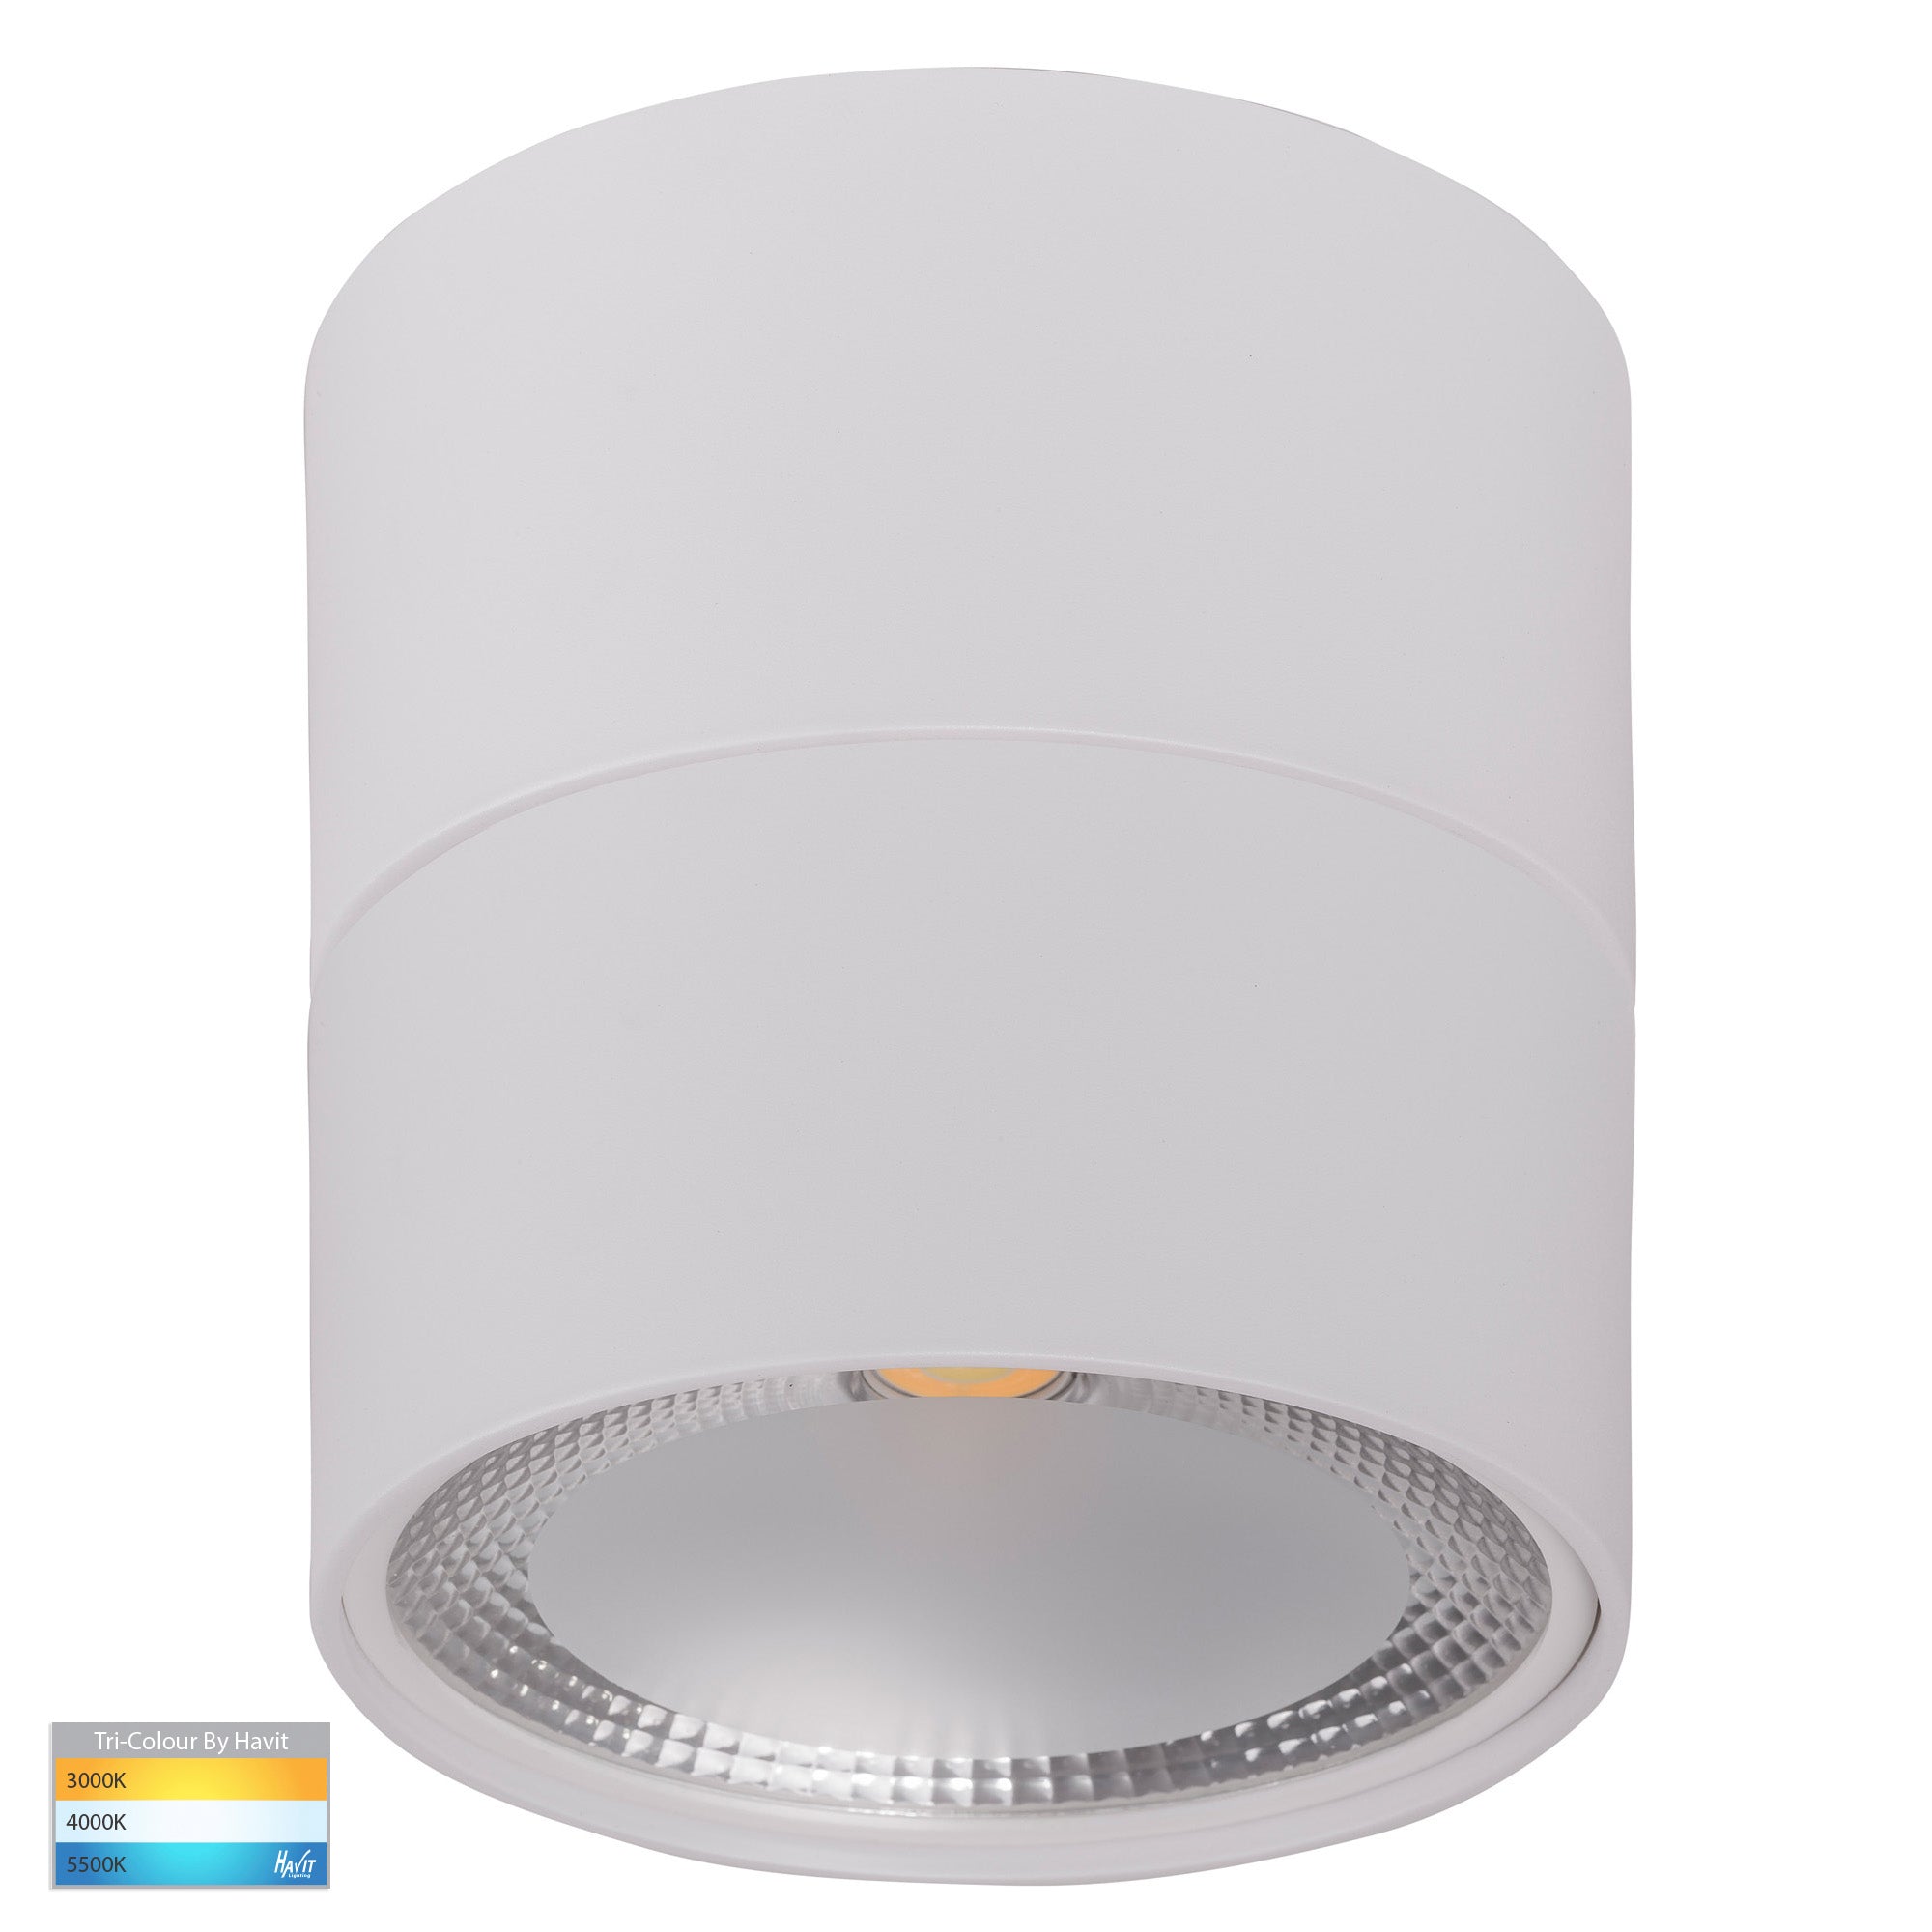 HV5805T-WHT-EXT | HV5805T-WHT-EXT-12V - Nella White 18w Surface Mounted LED Downlight with Extension